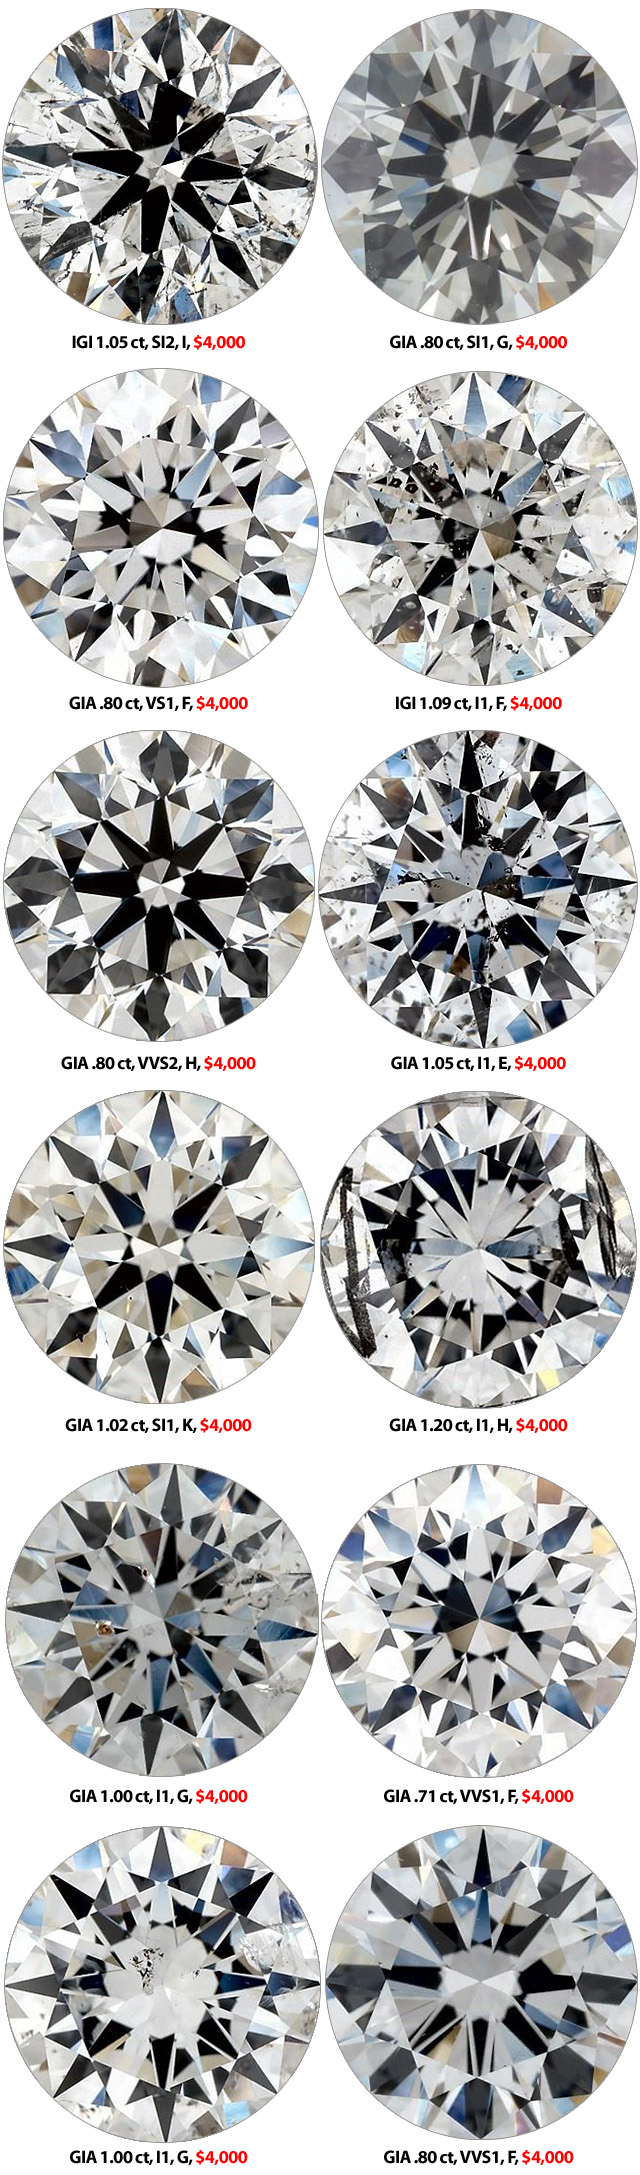 Different Diamonds For Four Thousand Dollars